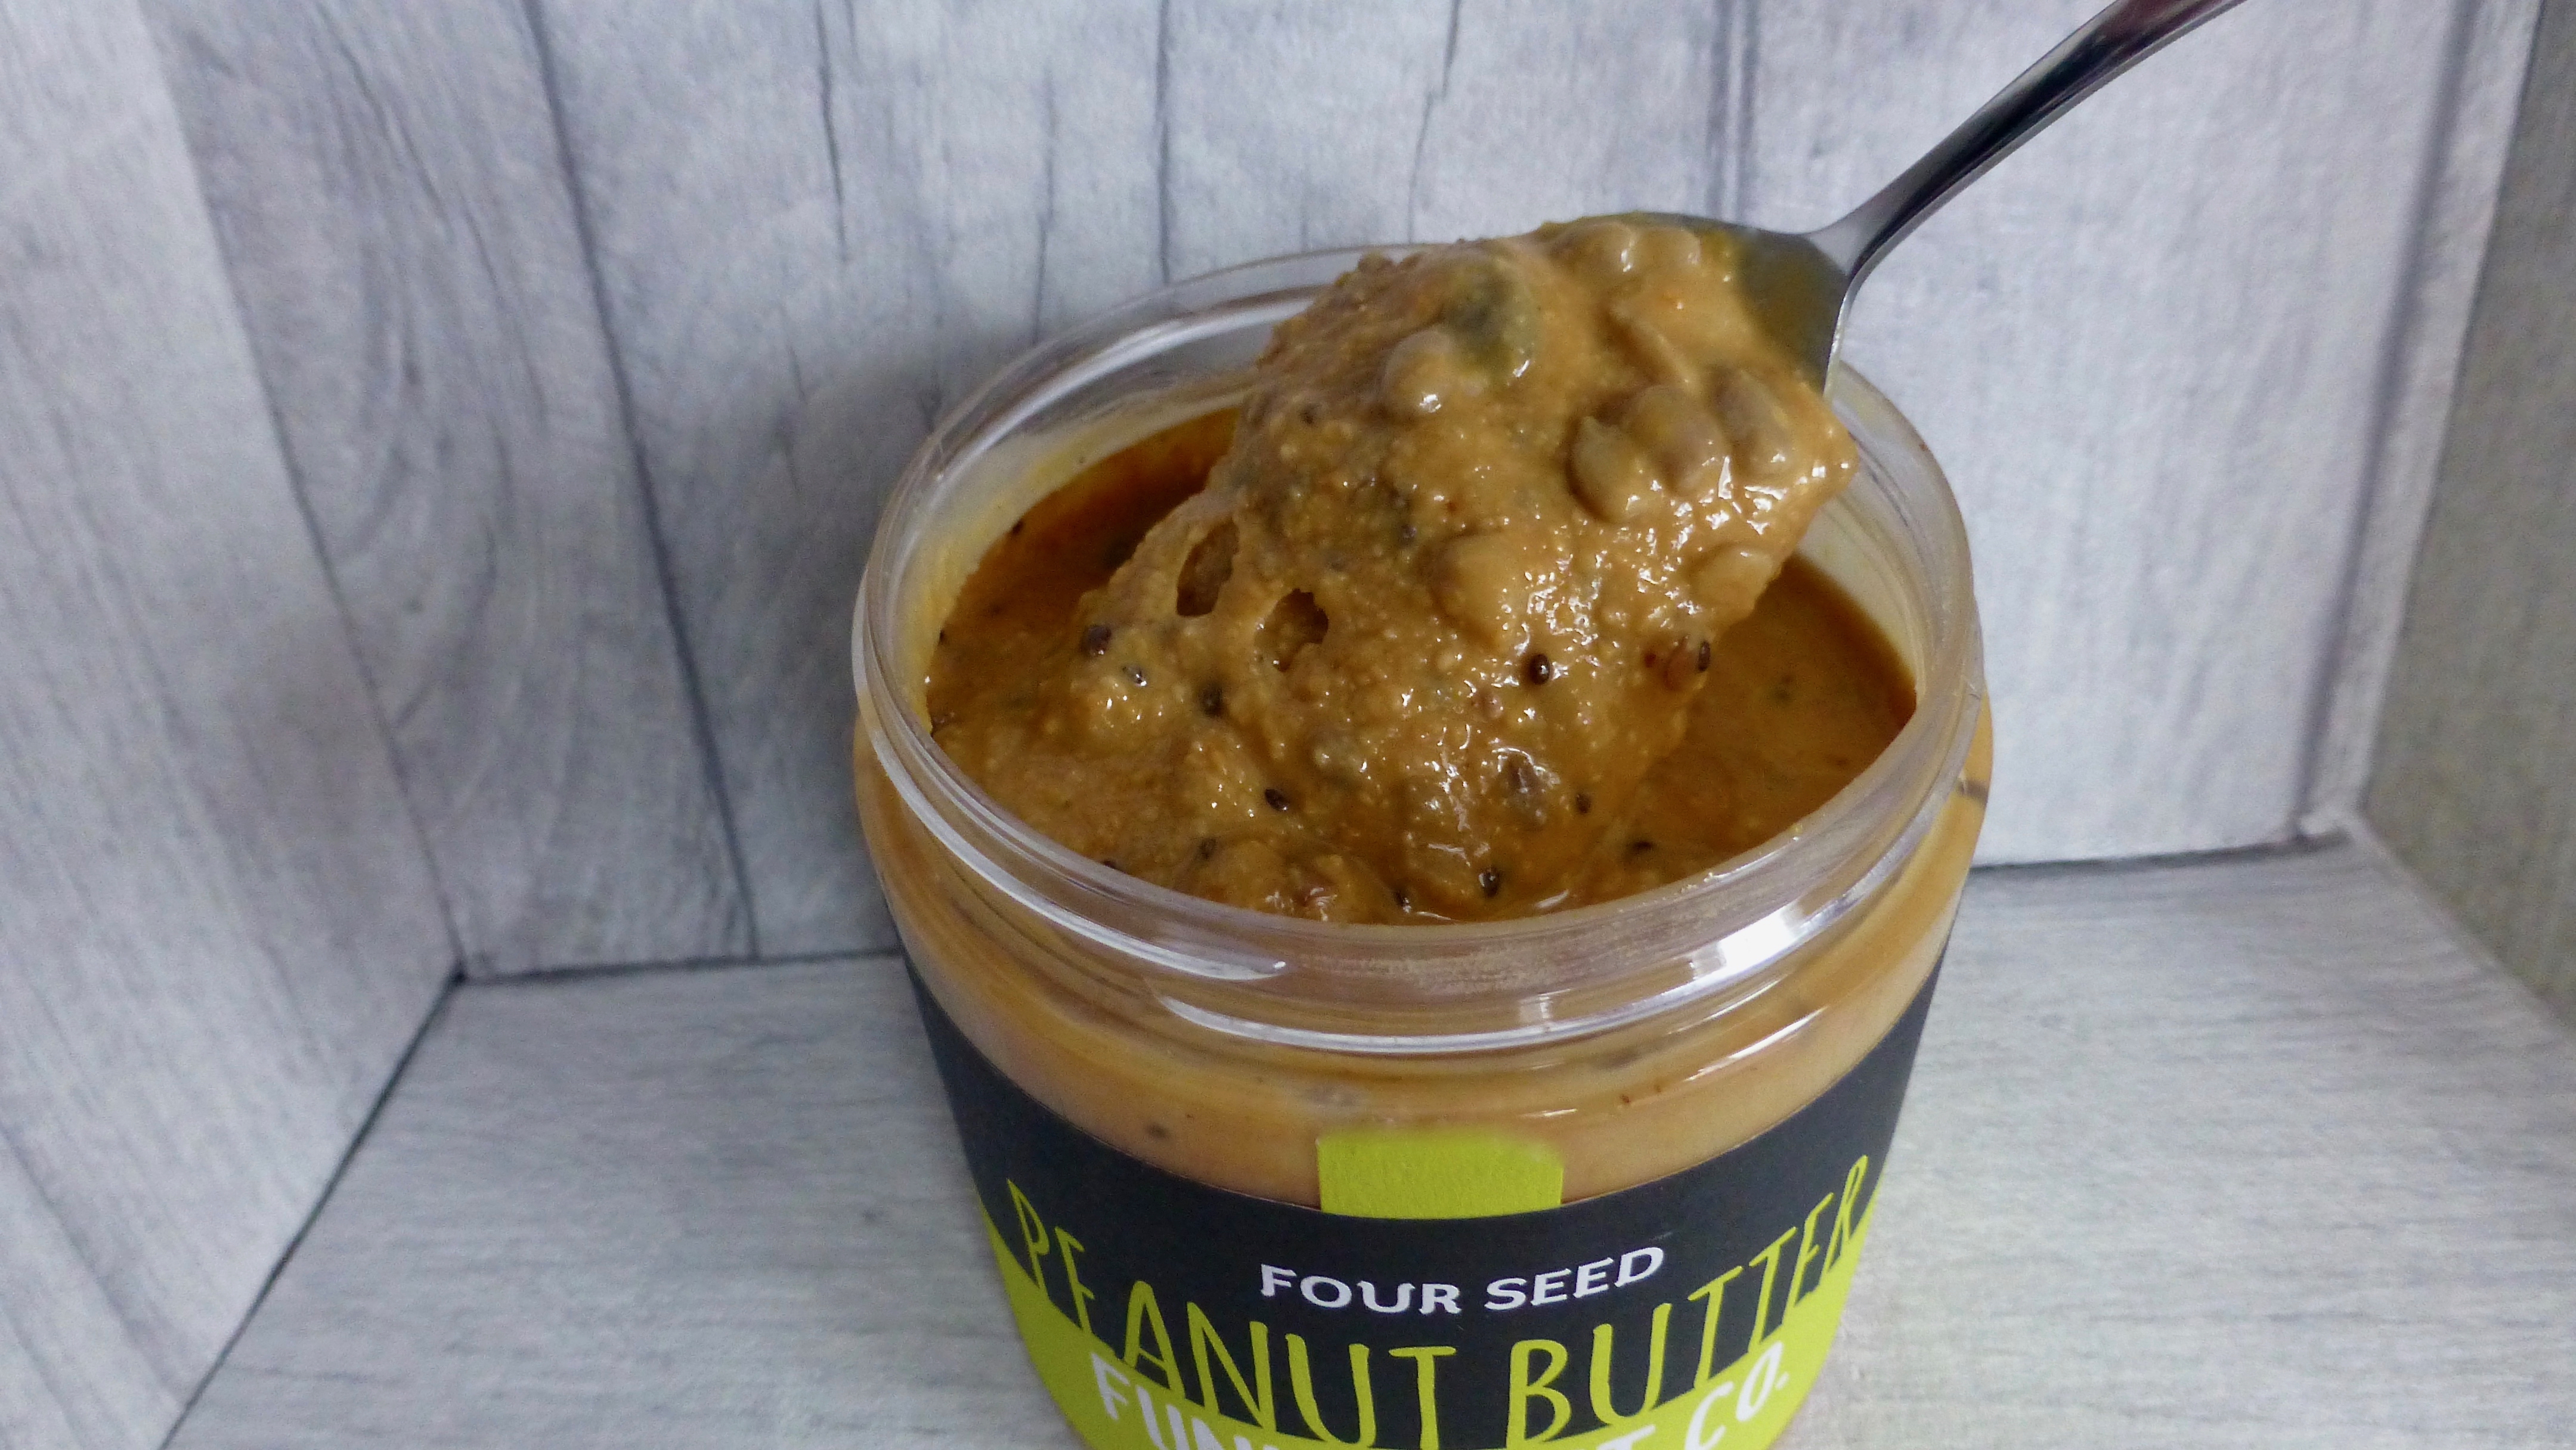 Four Seed Peanut Butter Funky Nut Co